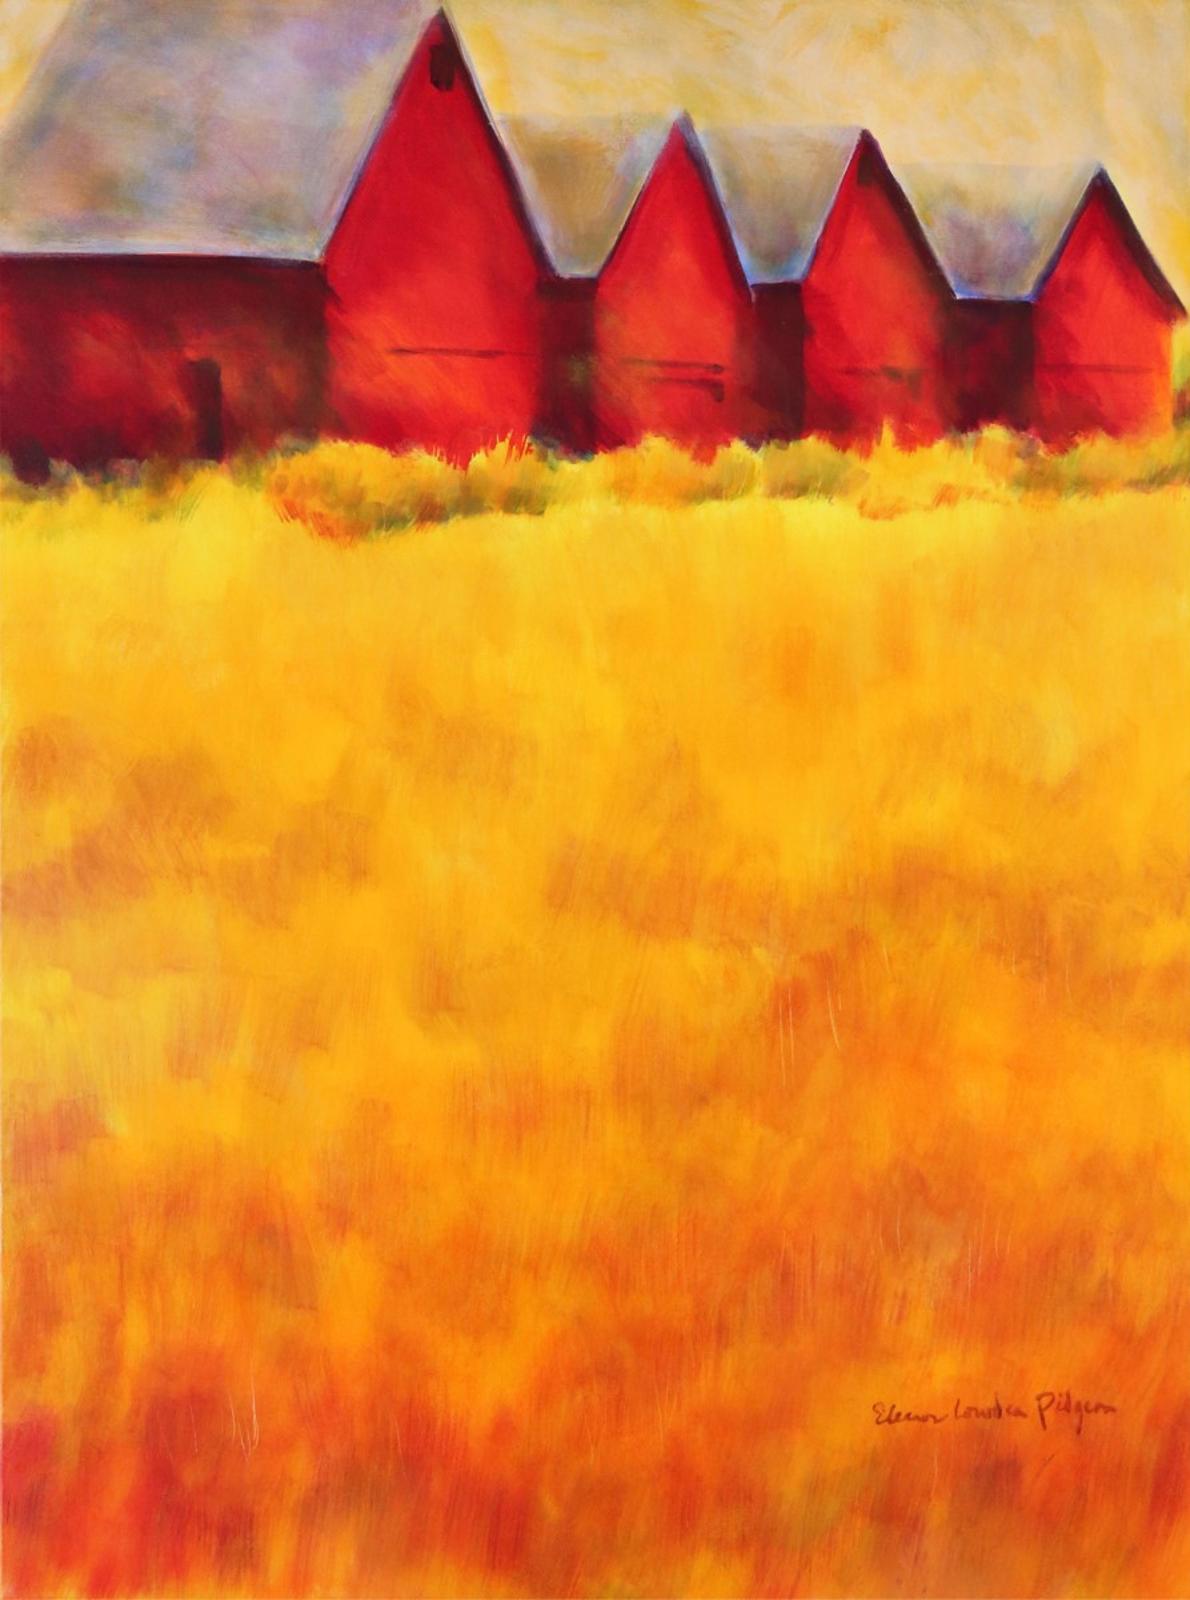 Eleanor Lowden - Red Barns